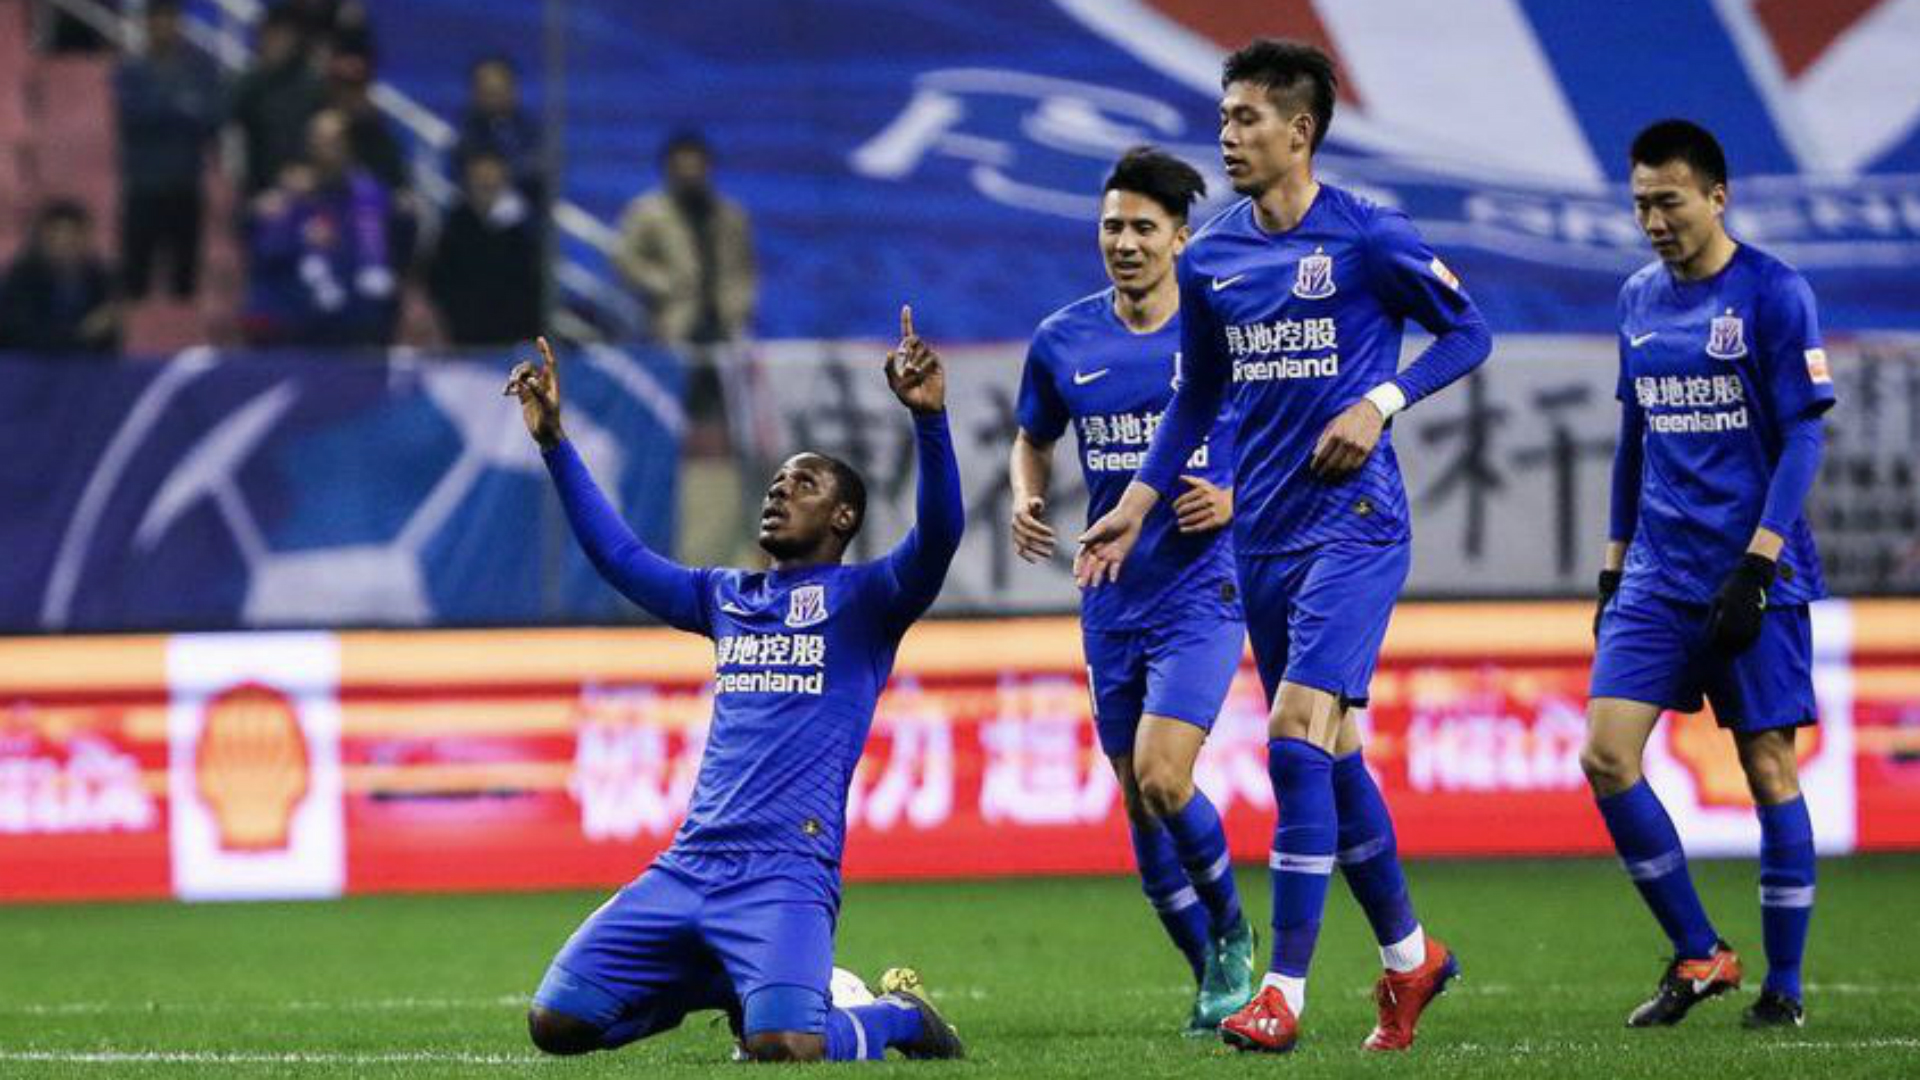 Ighalo wins first career title in China with Shanghai Shenhua